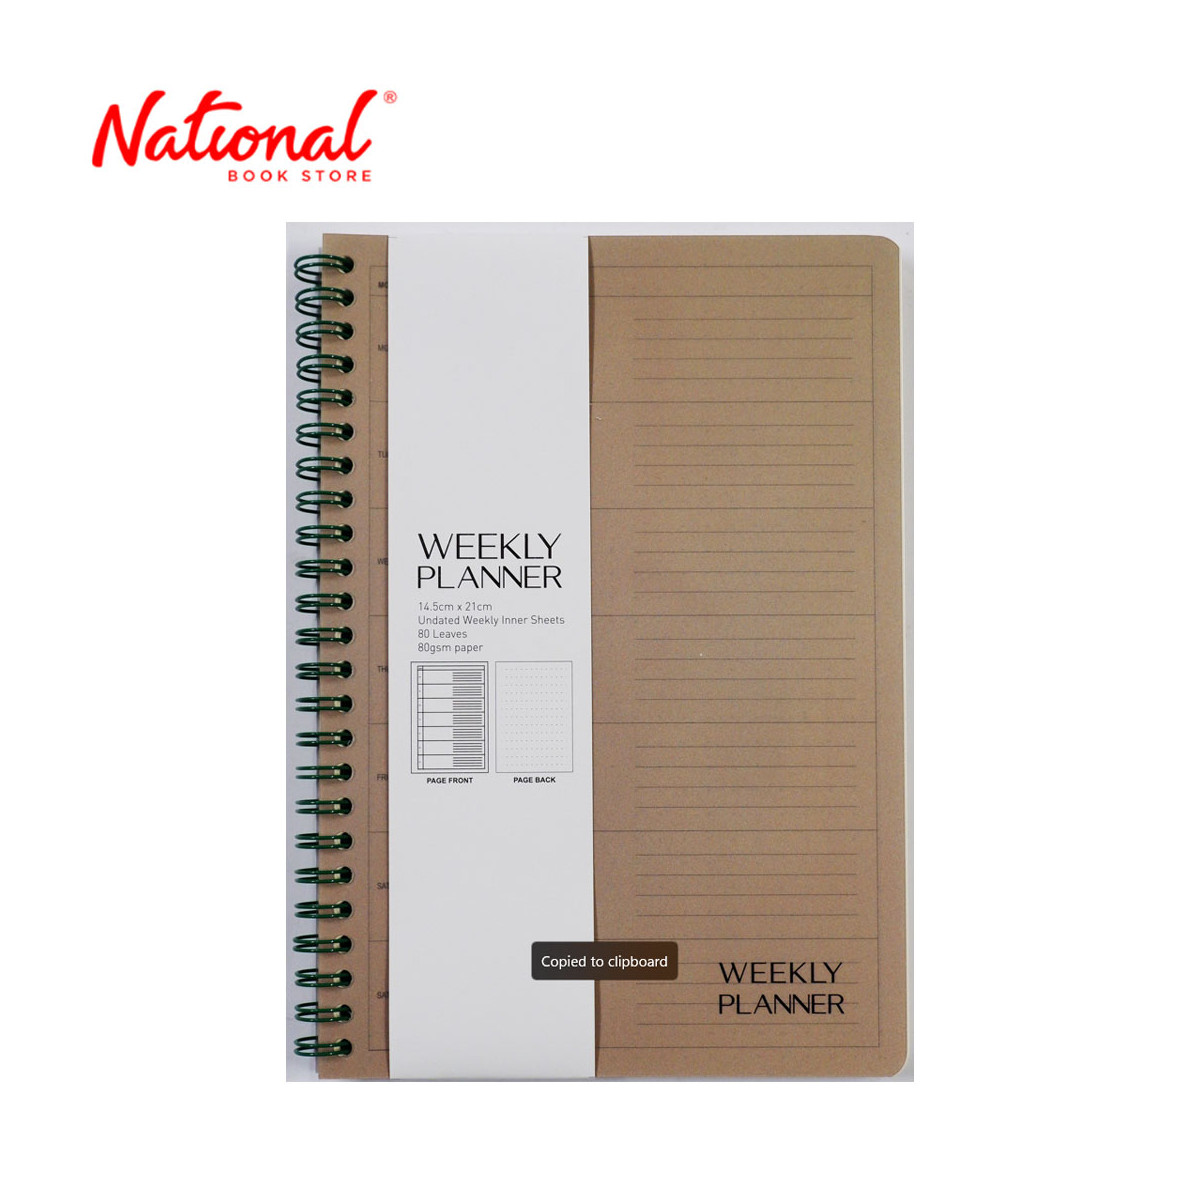 Premiere Undated Planner 14.5x 21 cm 80 Leaves 80gsm Soft Shadow - Paper Supplies - Gift Items